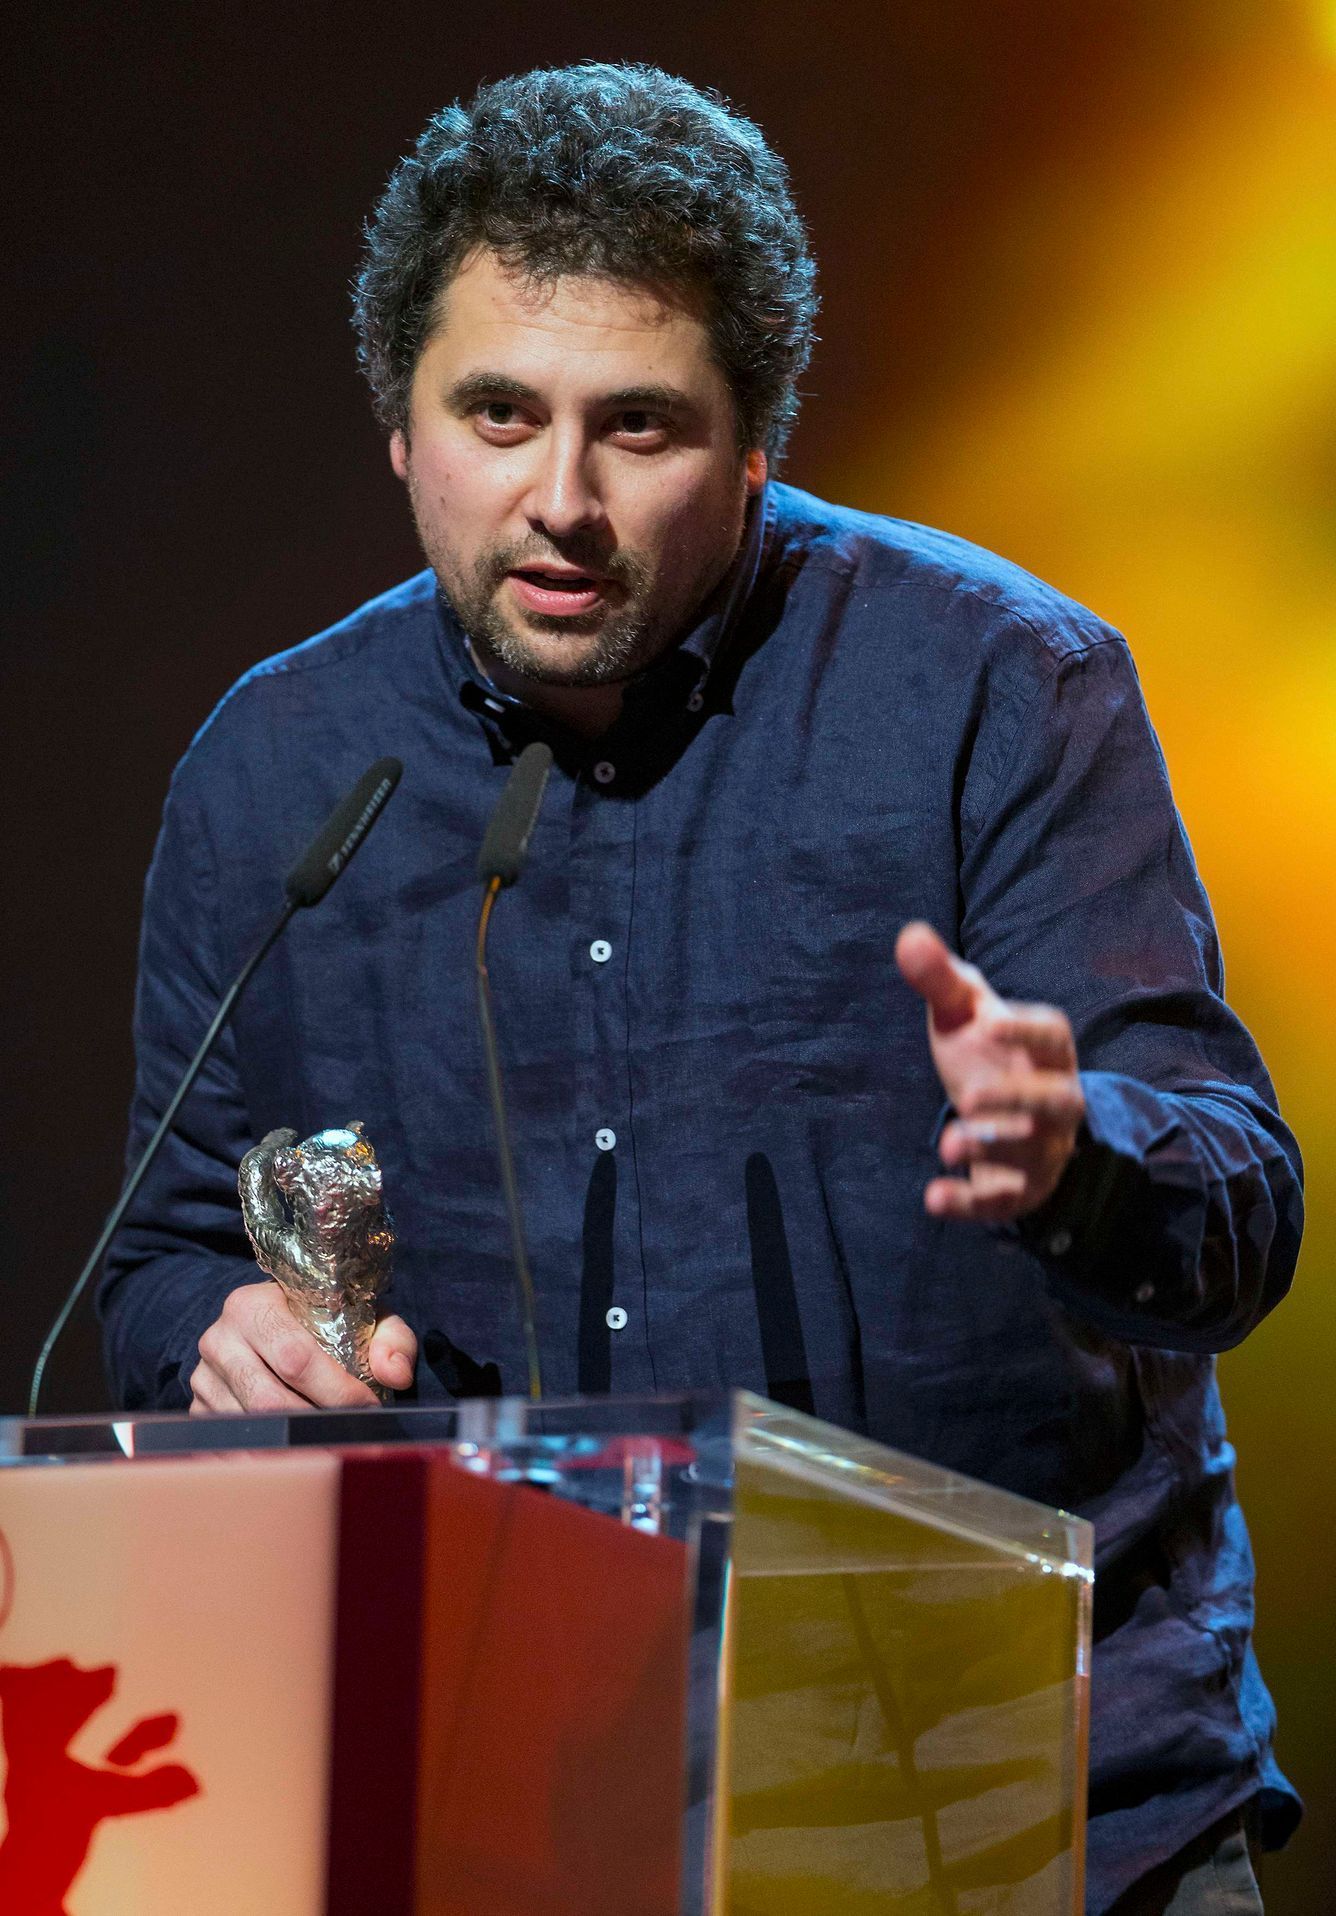 Jude speaks after receiving the Silver Bear for Best Director for the film 'Aferim' at the awards ceremony of the 65th Berlinale International Film Festival in Berlin